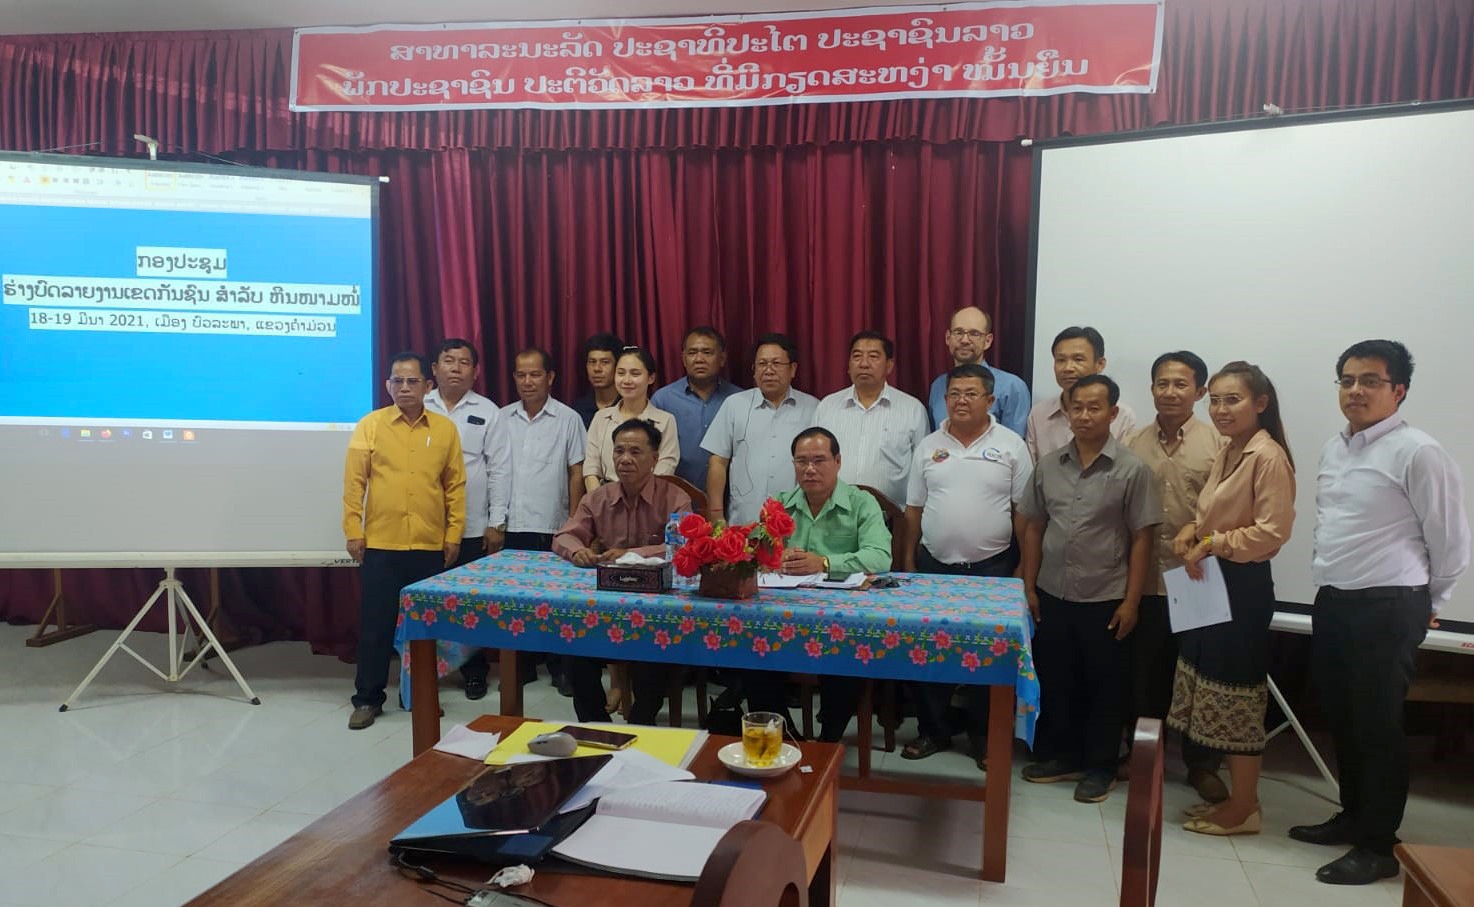 Bufferzone for Hin Nam No defined – another criteria for the World Heritage Nomination met!